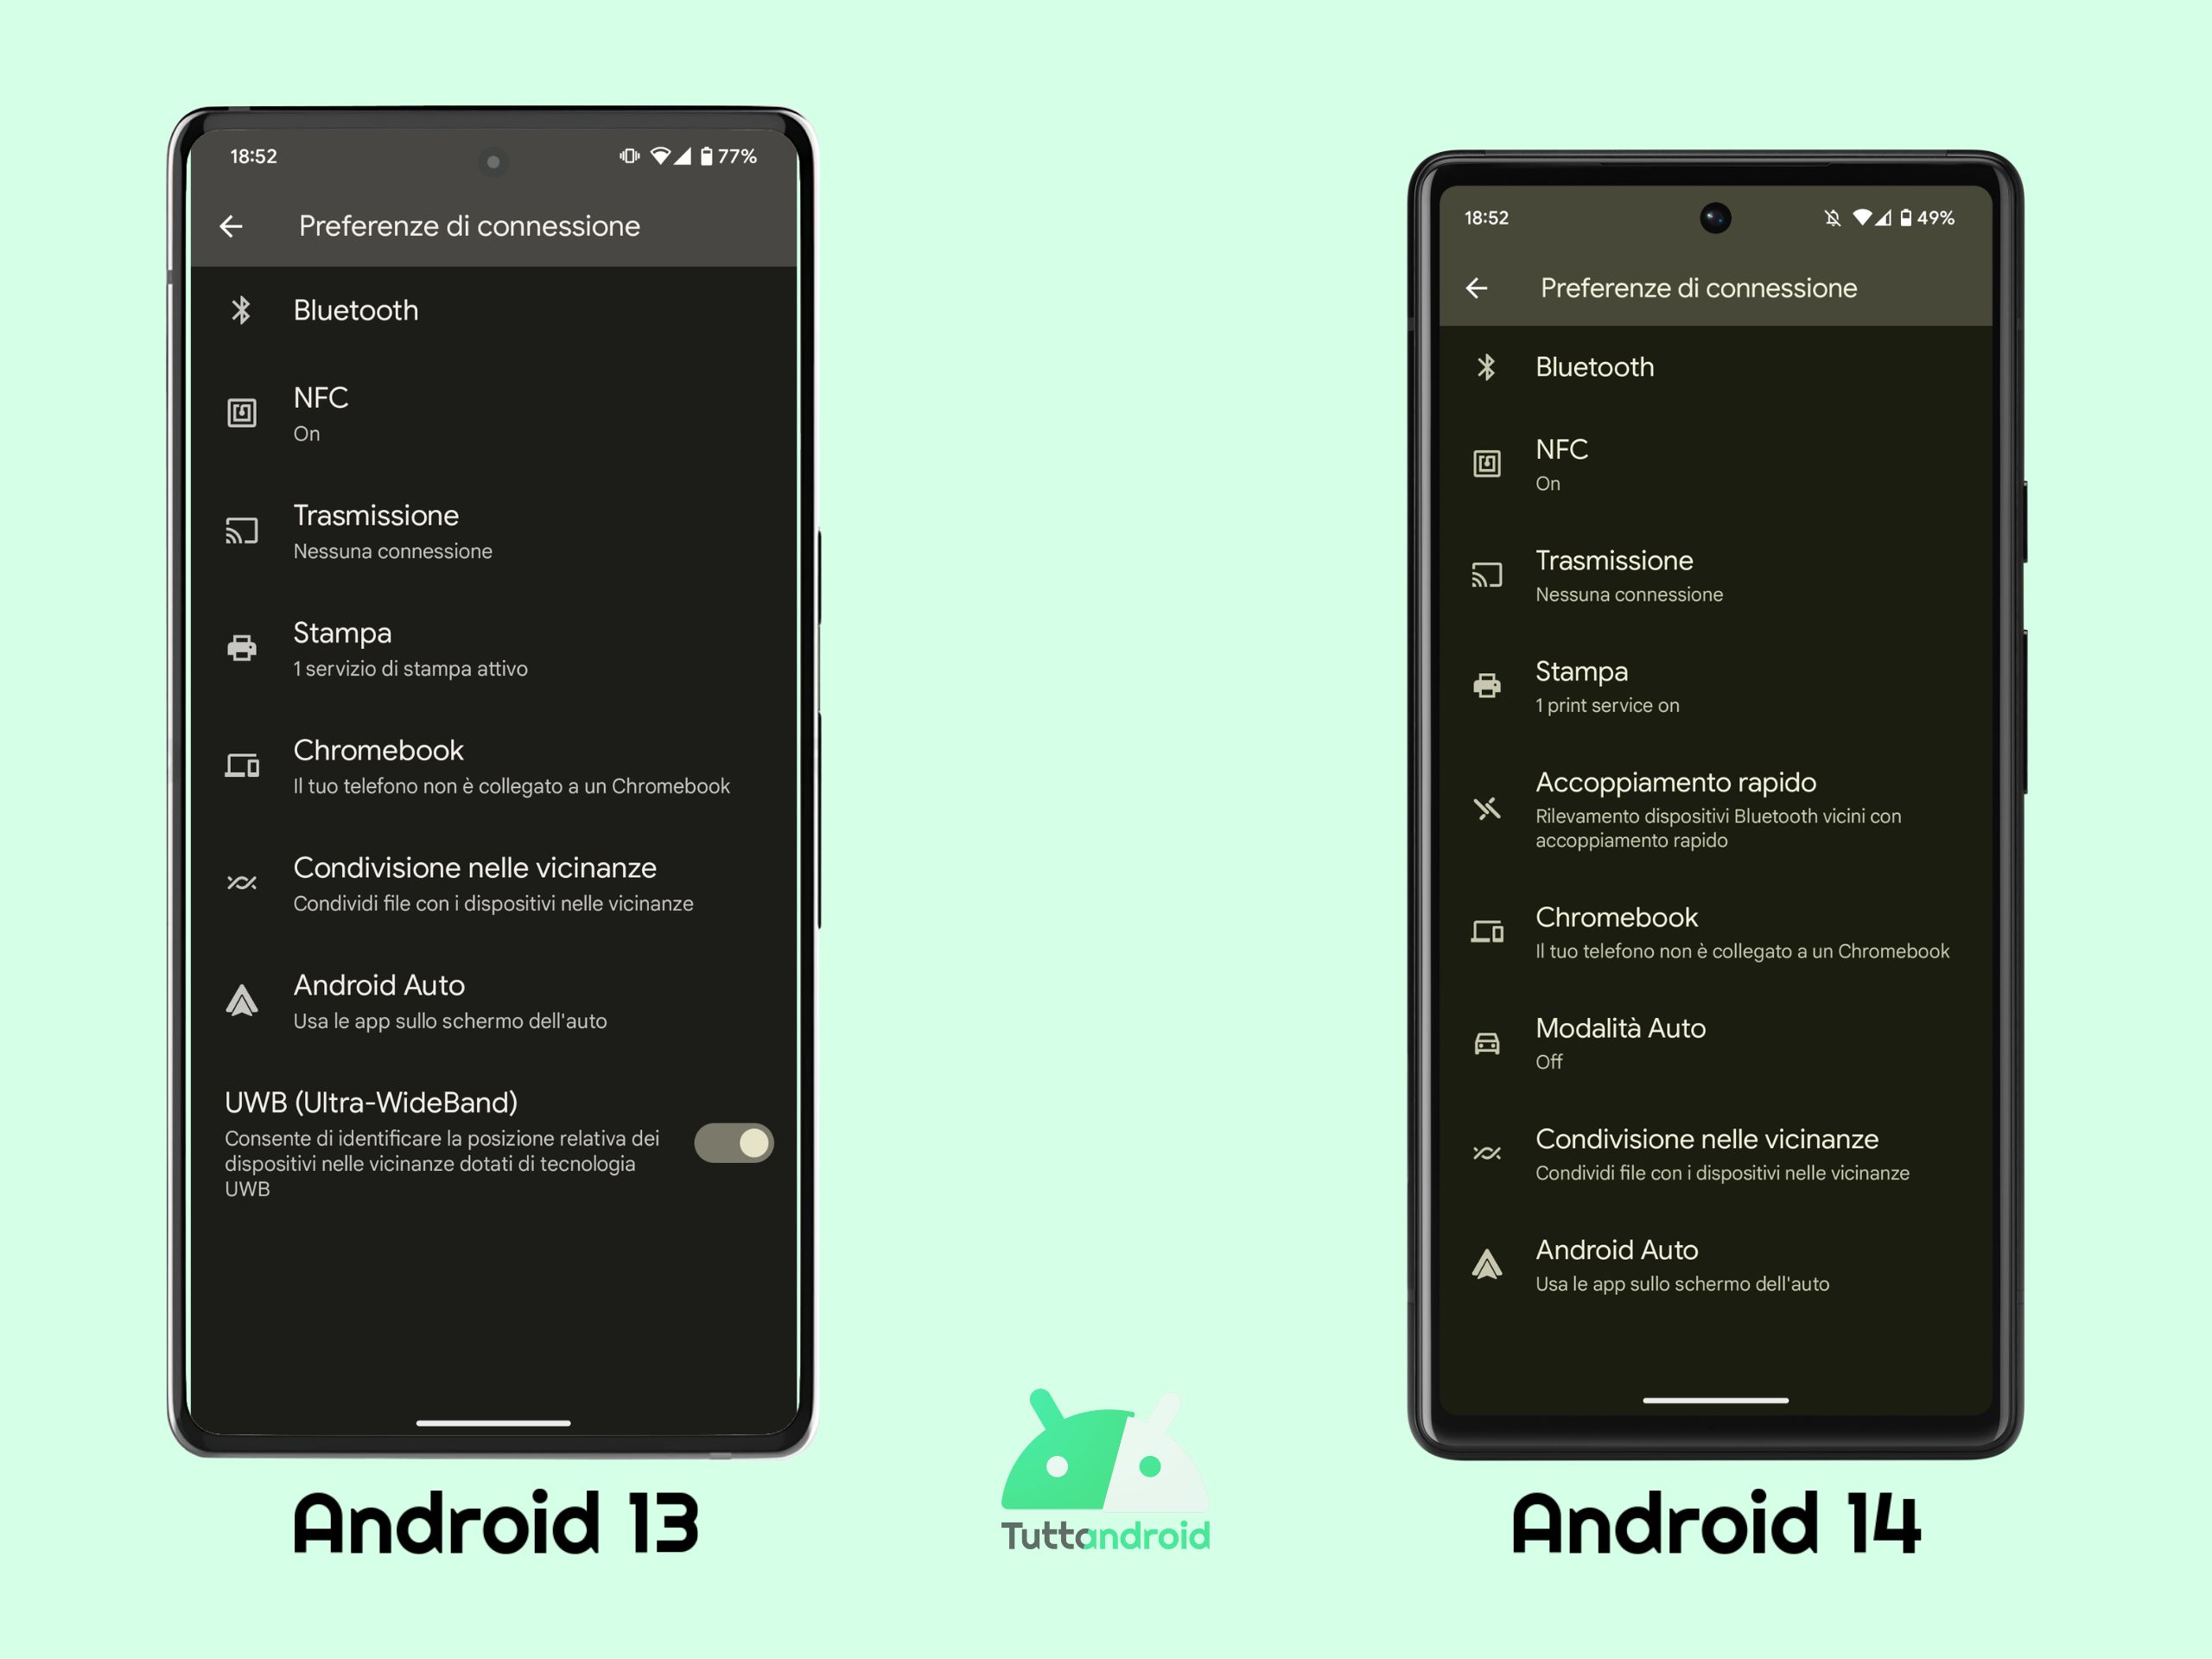 Fast pair - Android 13 vs Android 14 DP1